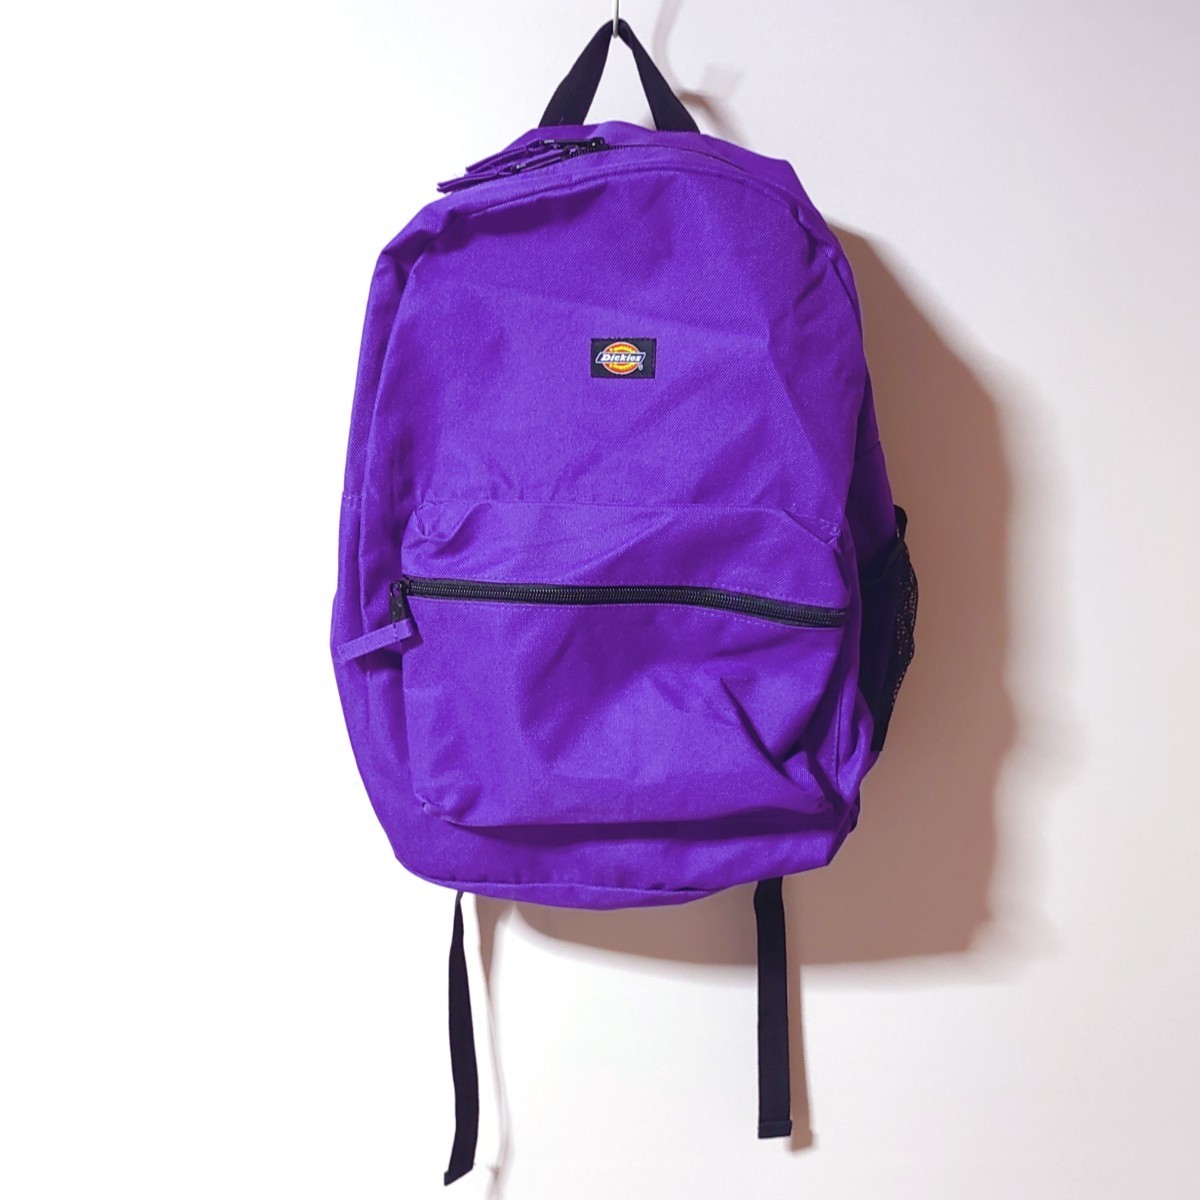 PayPayフリマ｜STUDENT BACKPACK ディッキーズ リュック 紫